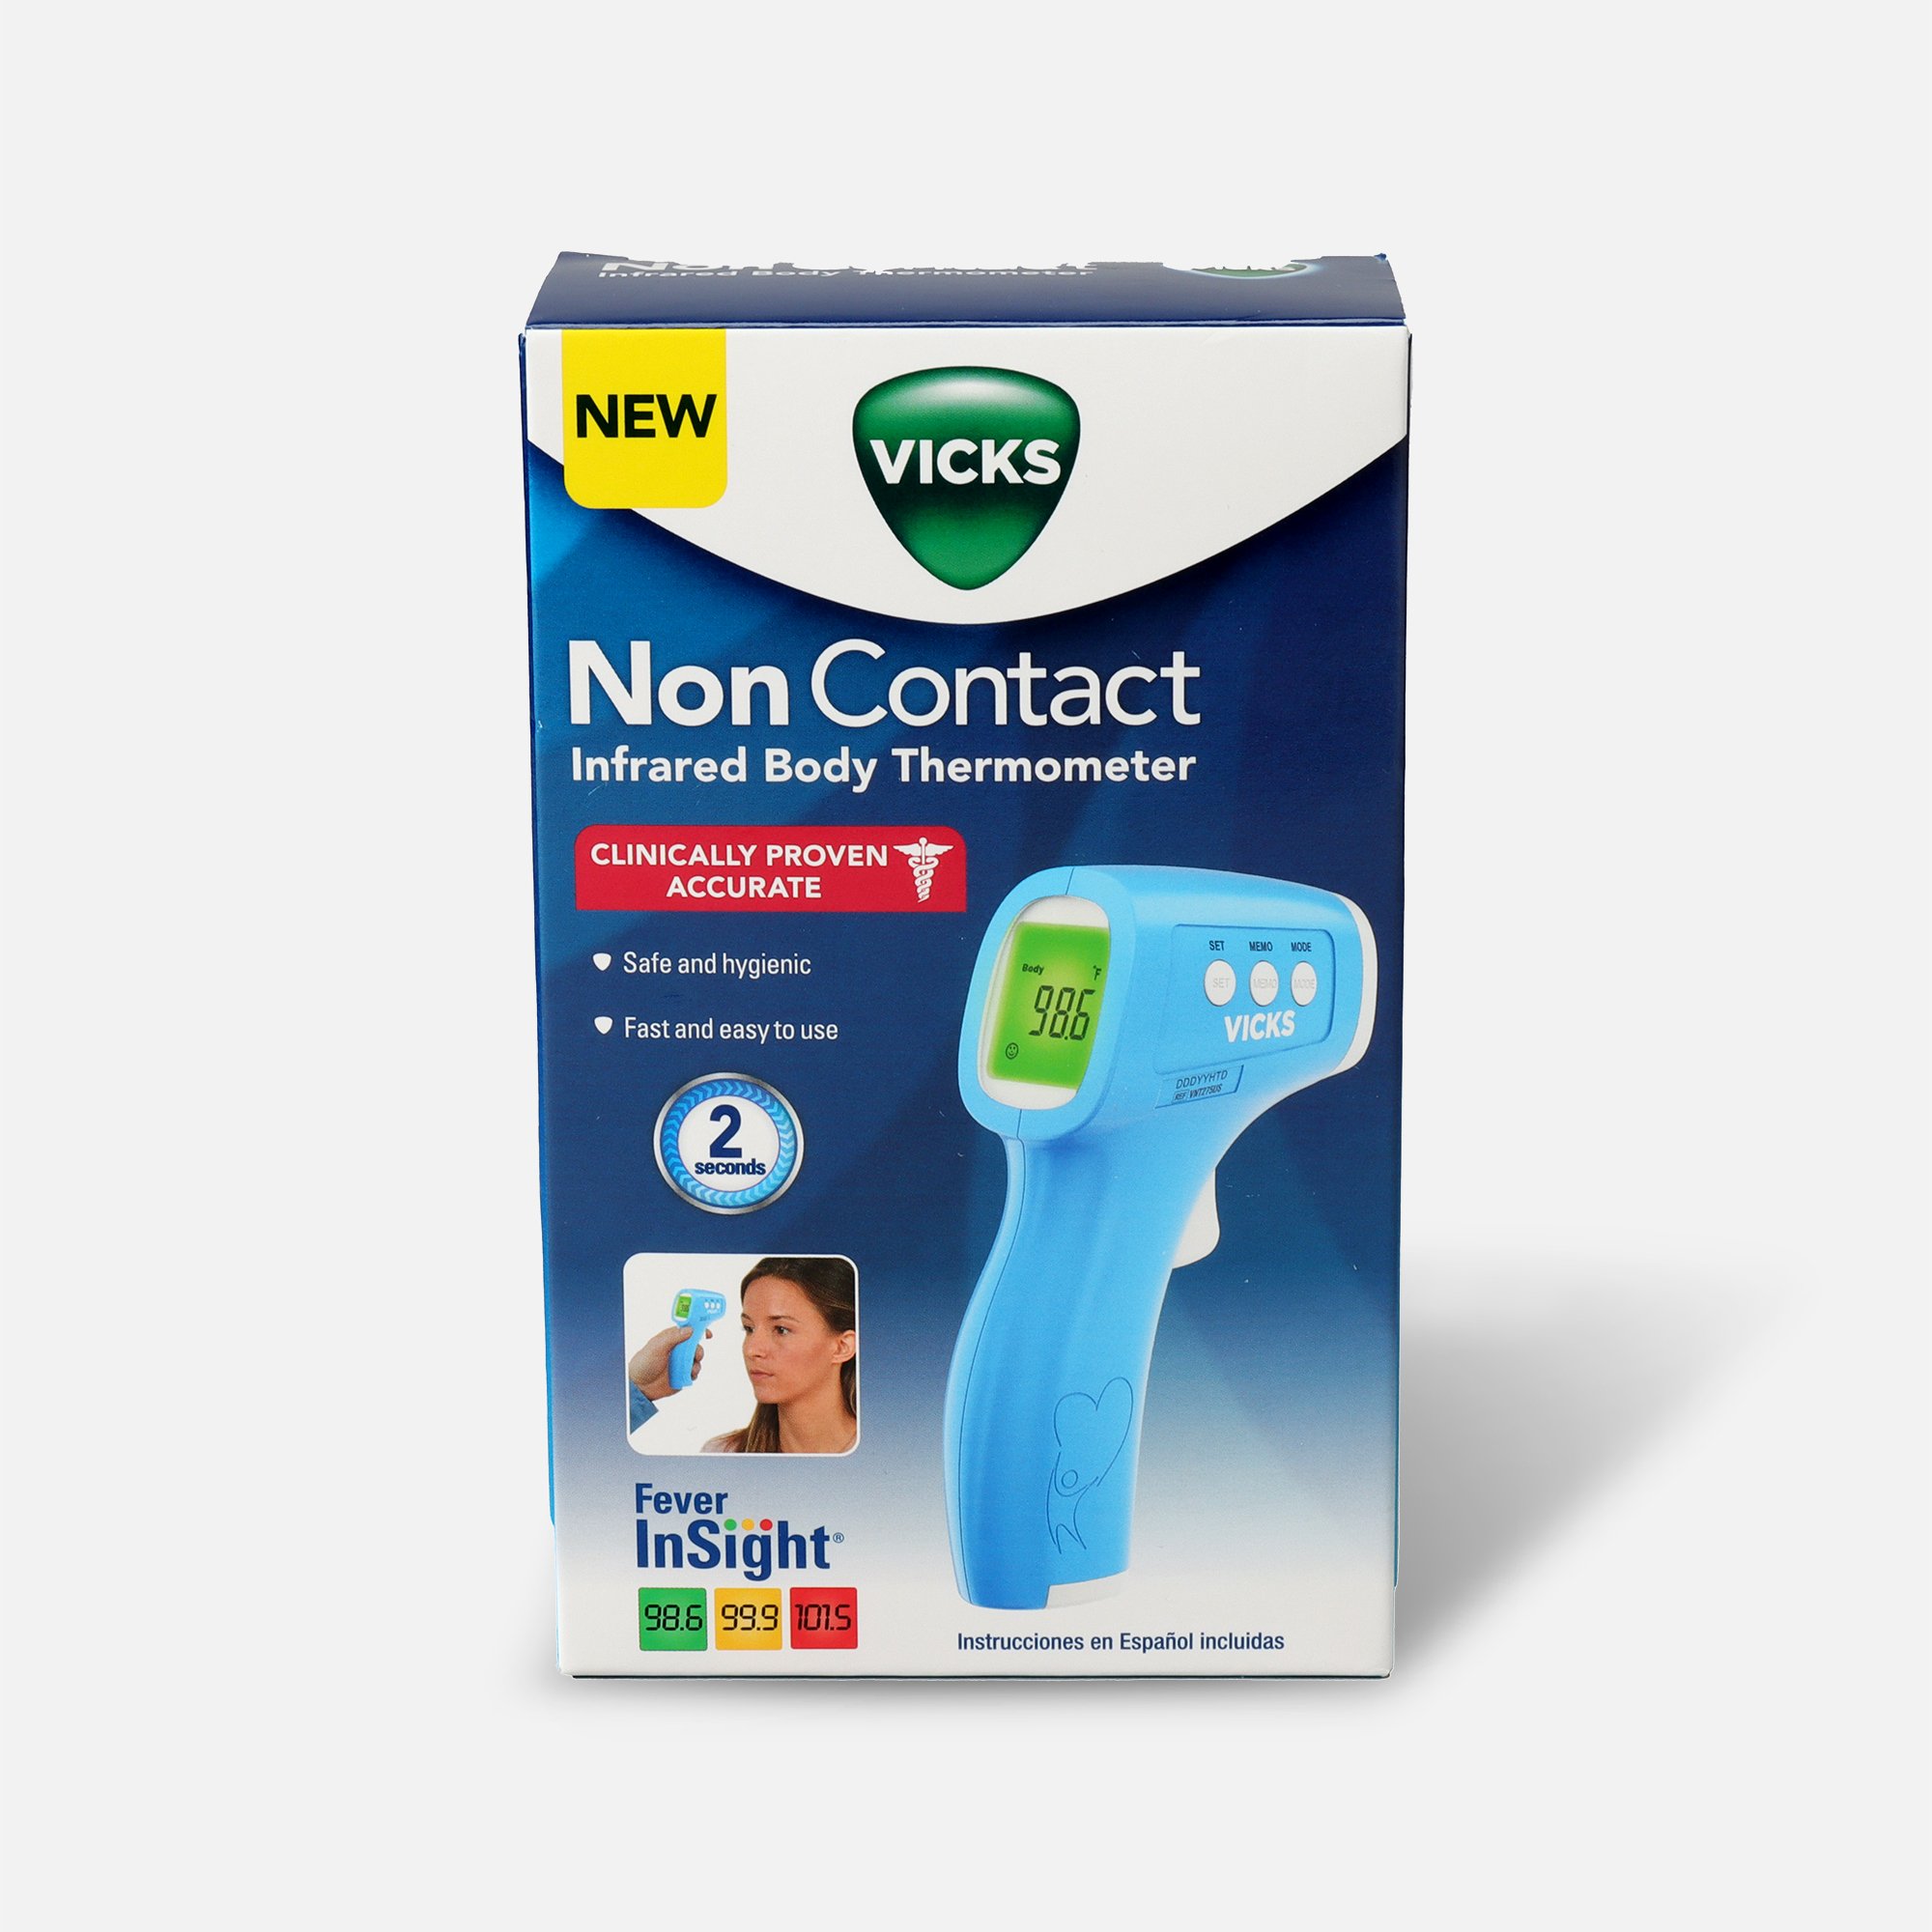 https://fsastore.com/on/demandware.static/-/Sites-hec-master/default/dw8e3d0b51/images/large/vicks-non-contact-infrared-body-thermometer-29406-1.jpg